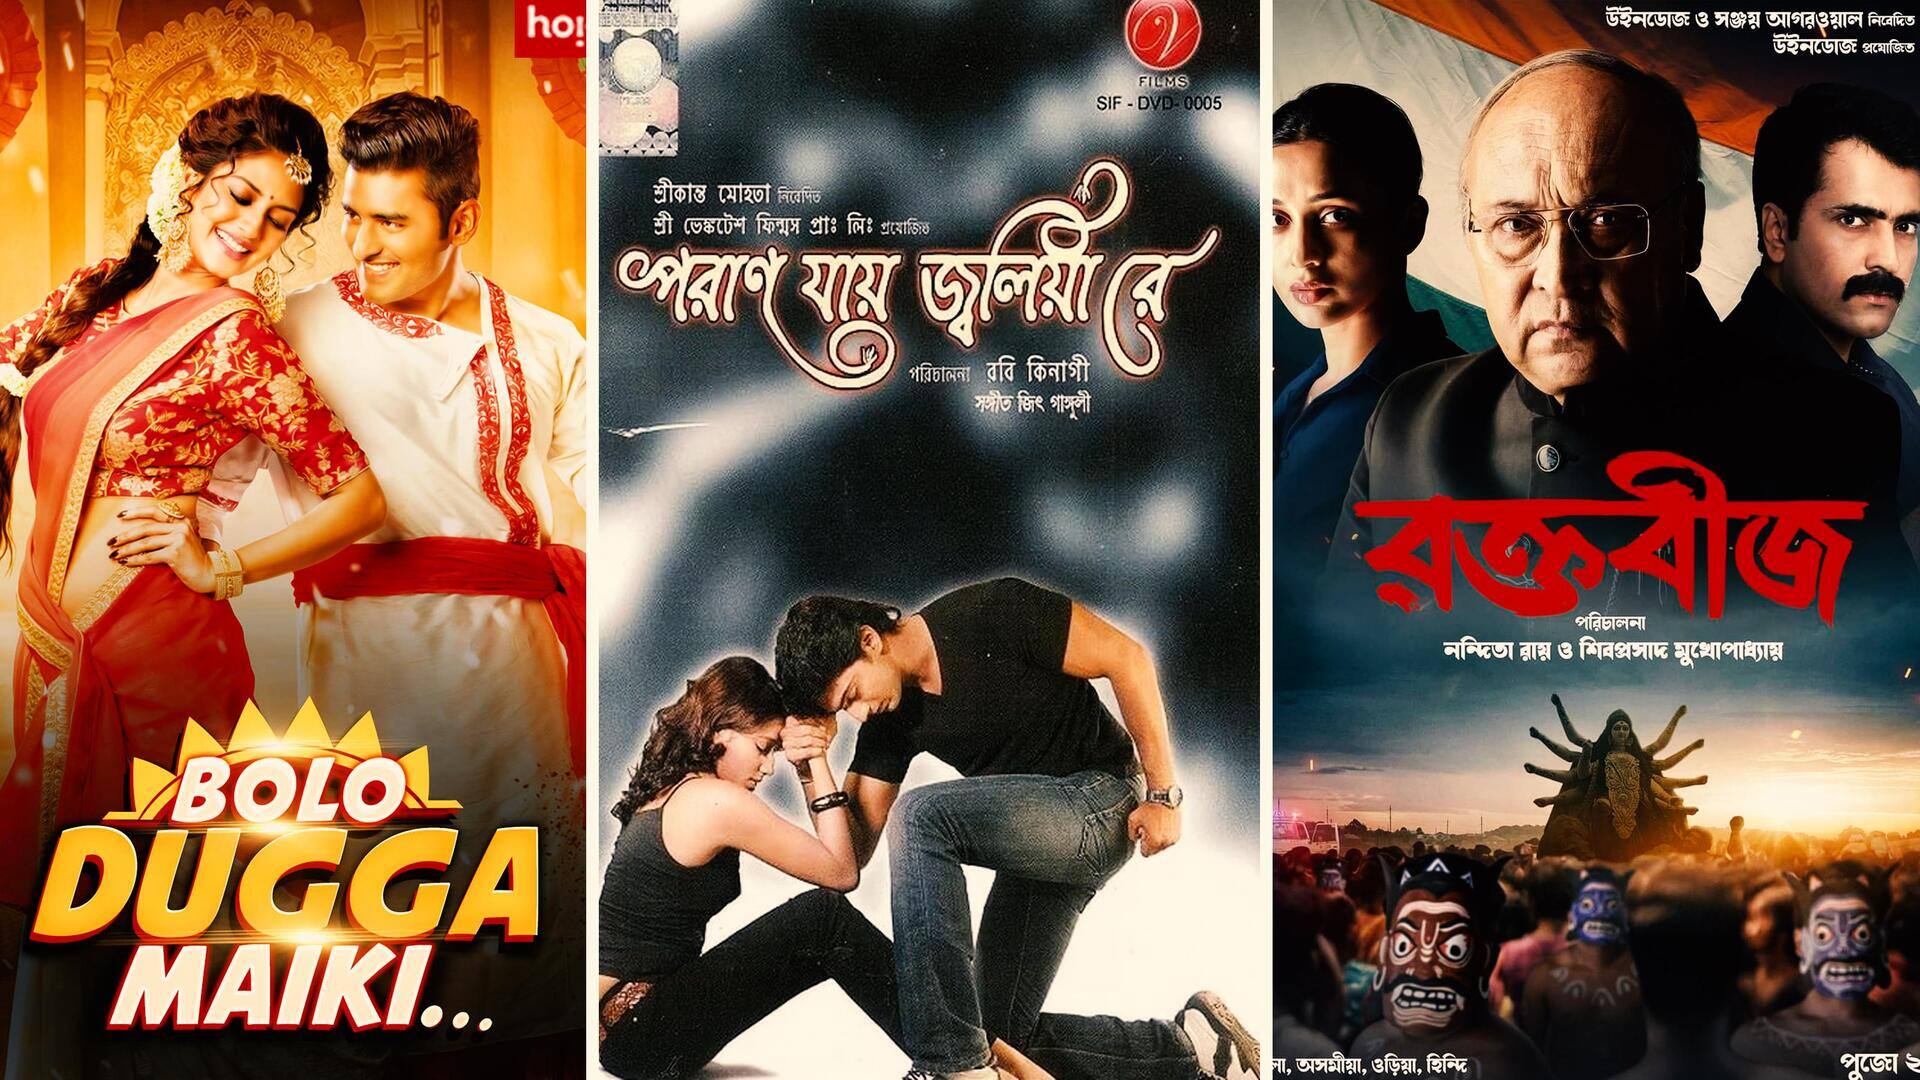 Durga Puja film songs you must have on your playlist